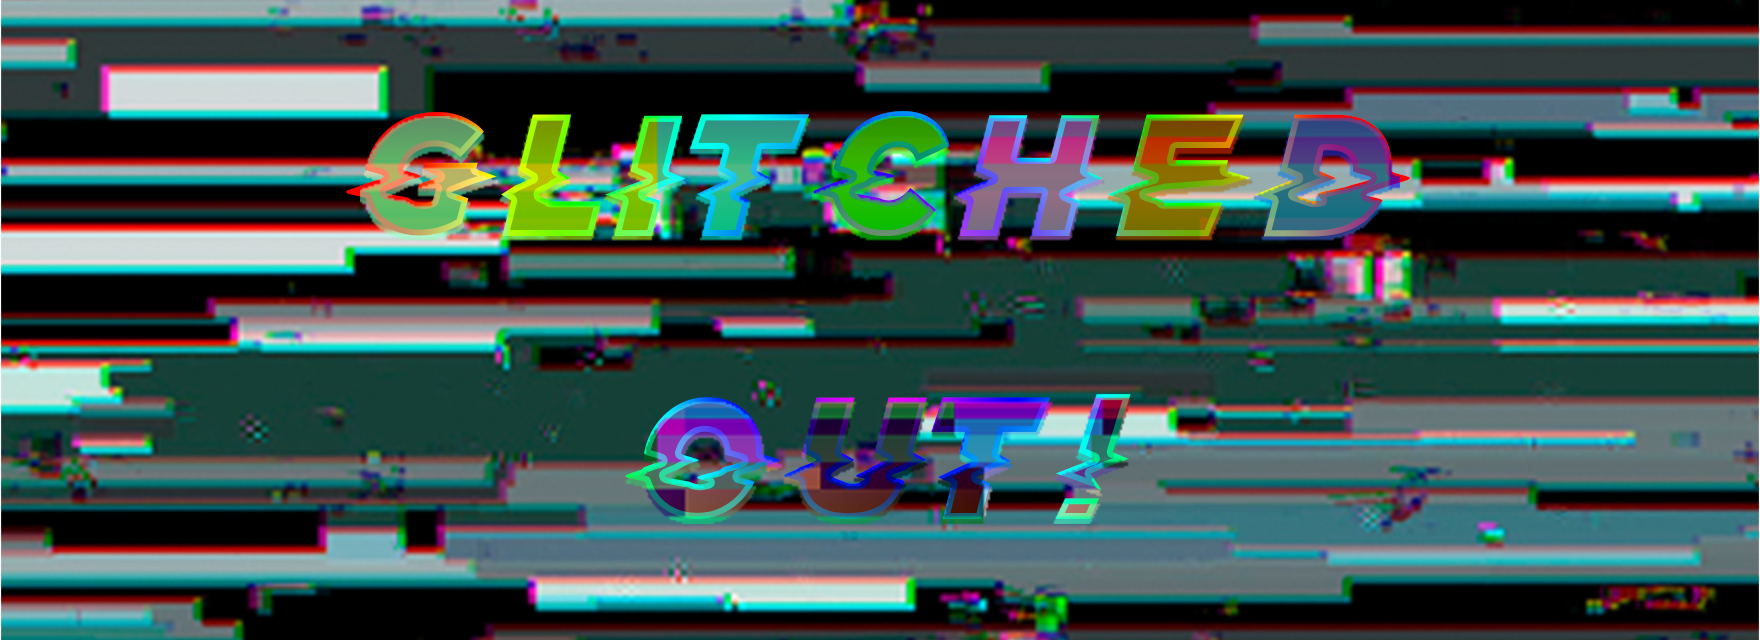 Glitched Out!